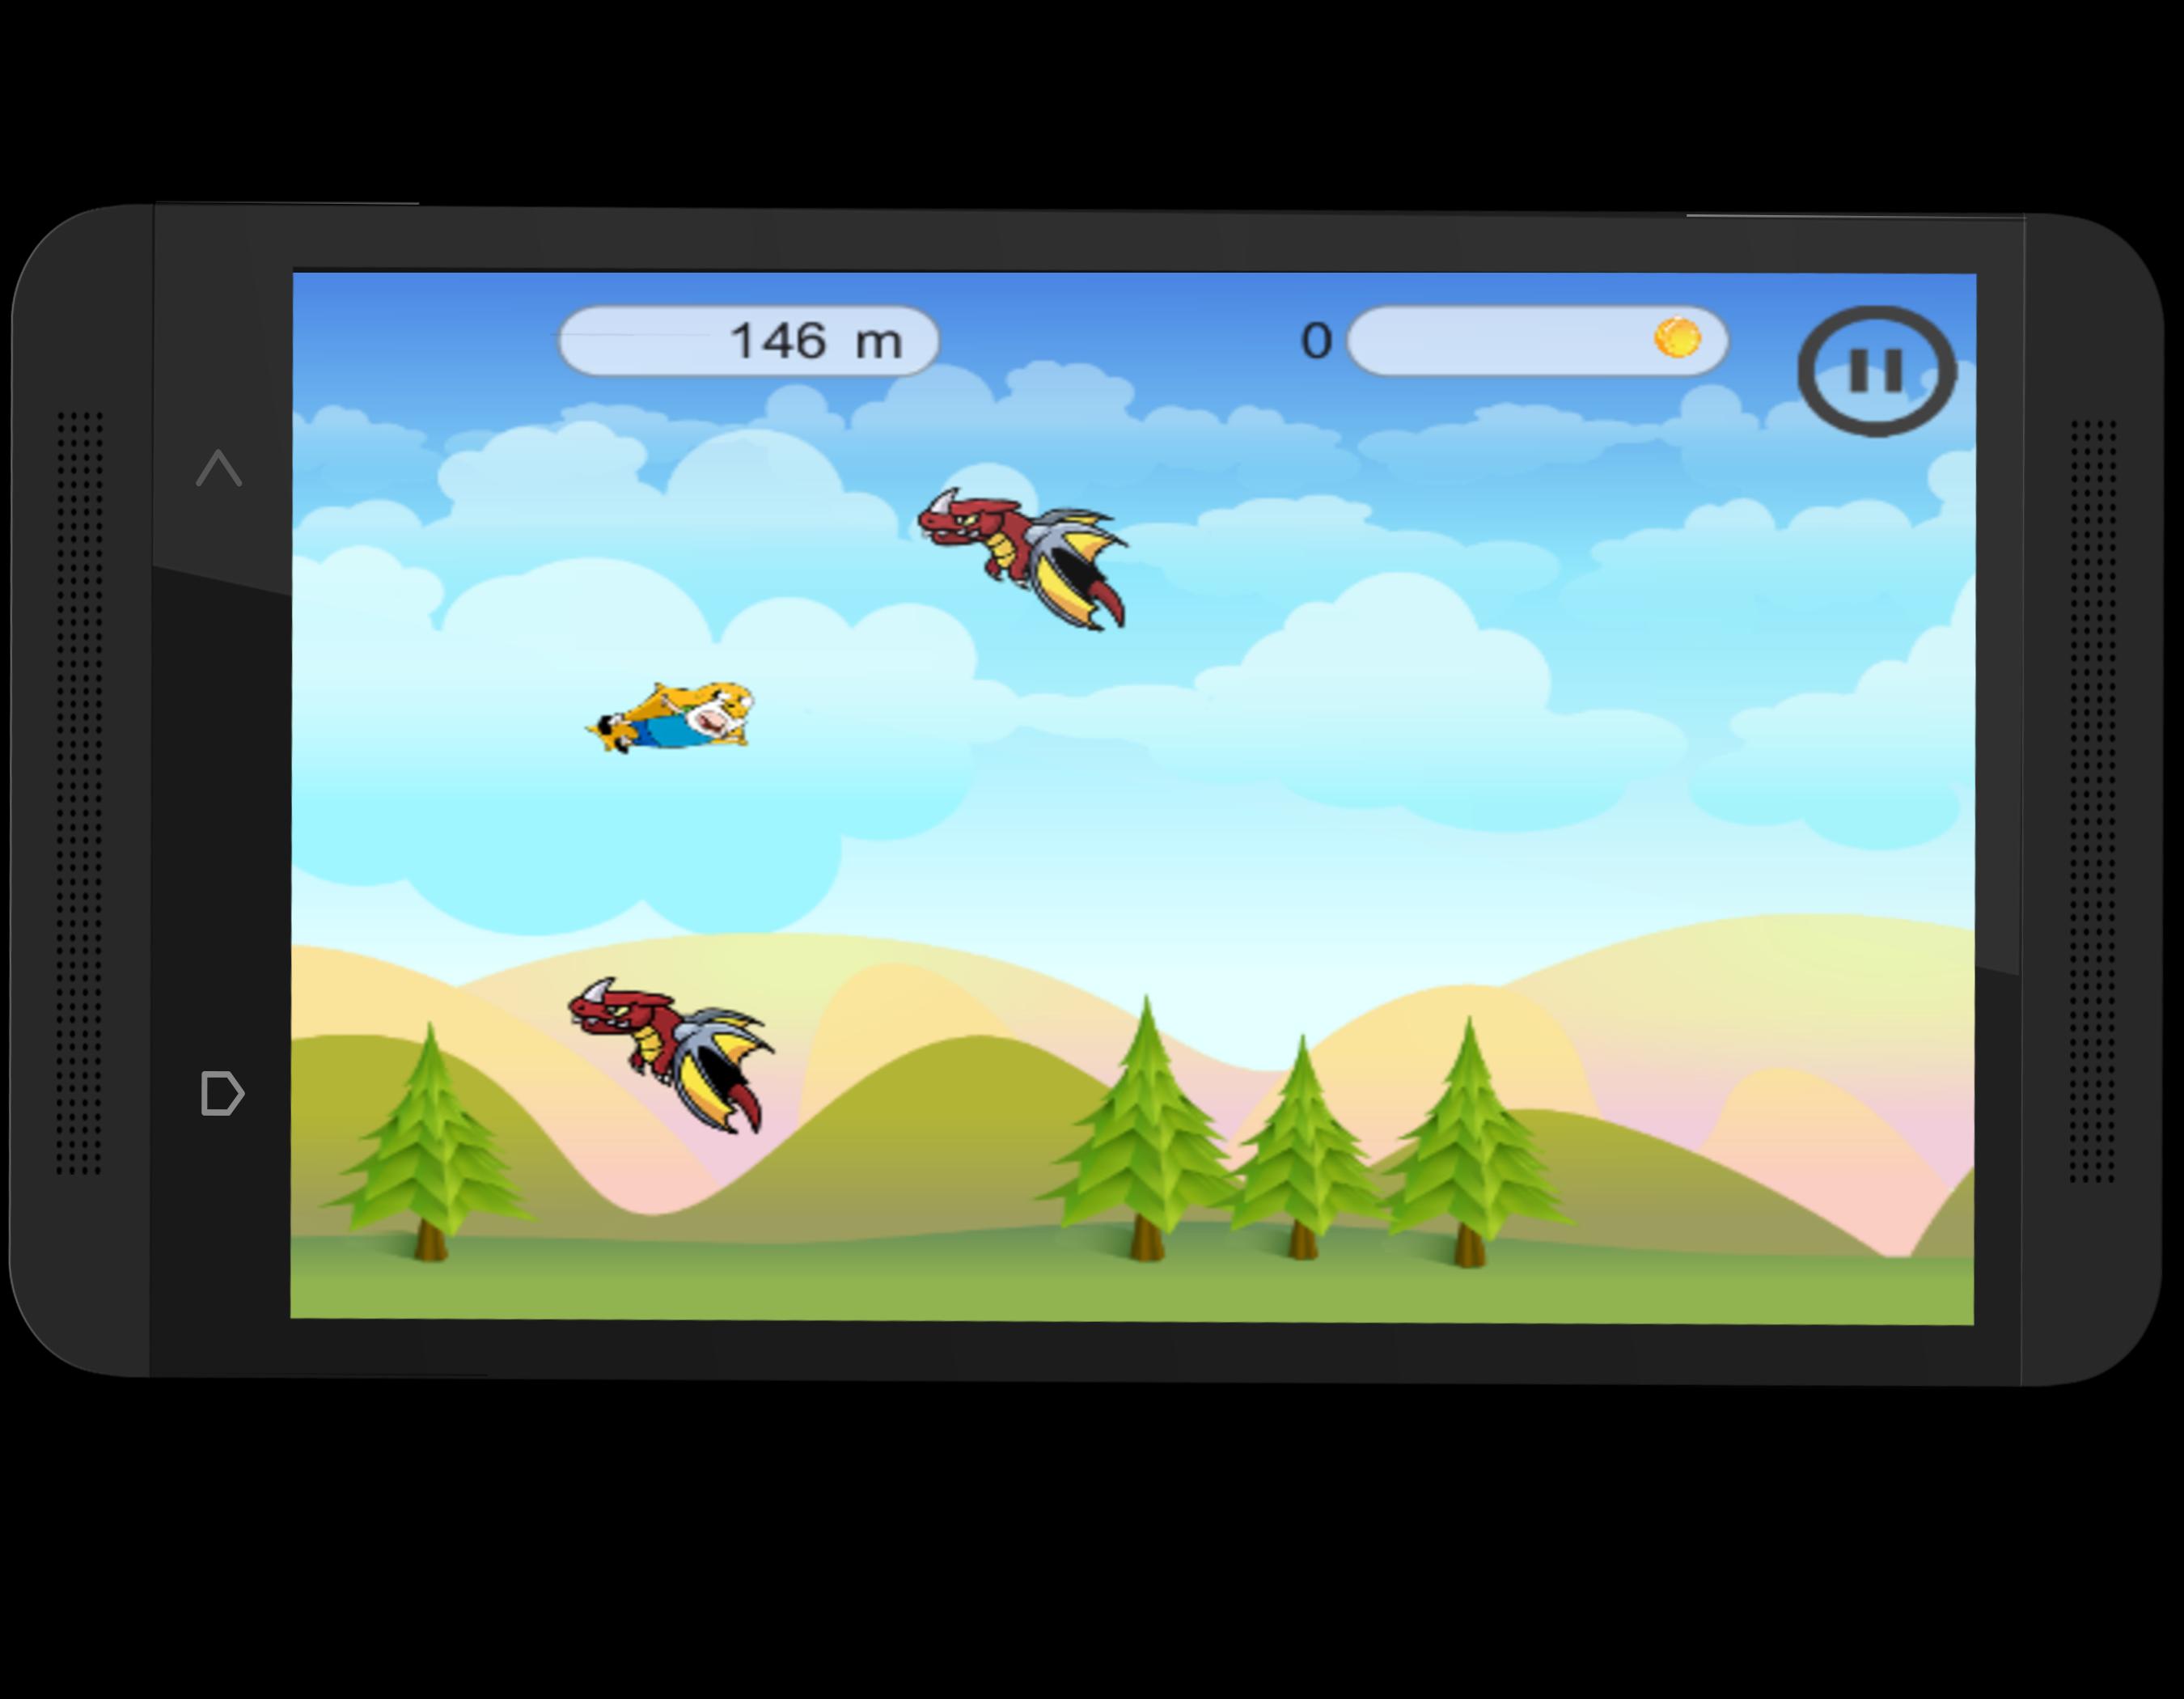 Джангл адвентура игра. Fly Jungle Adventure. Flying Screen. Millies Adventure download Android.